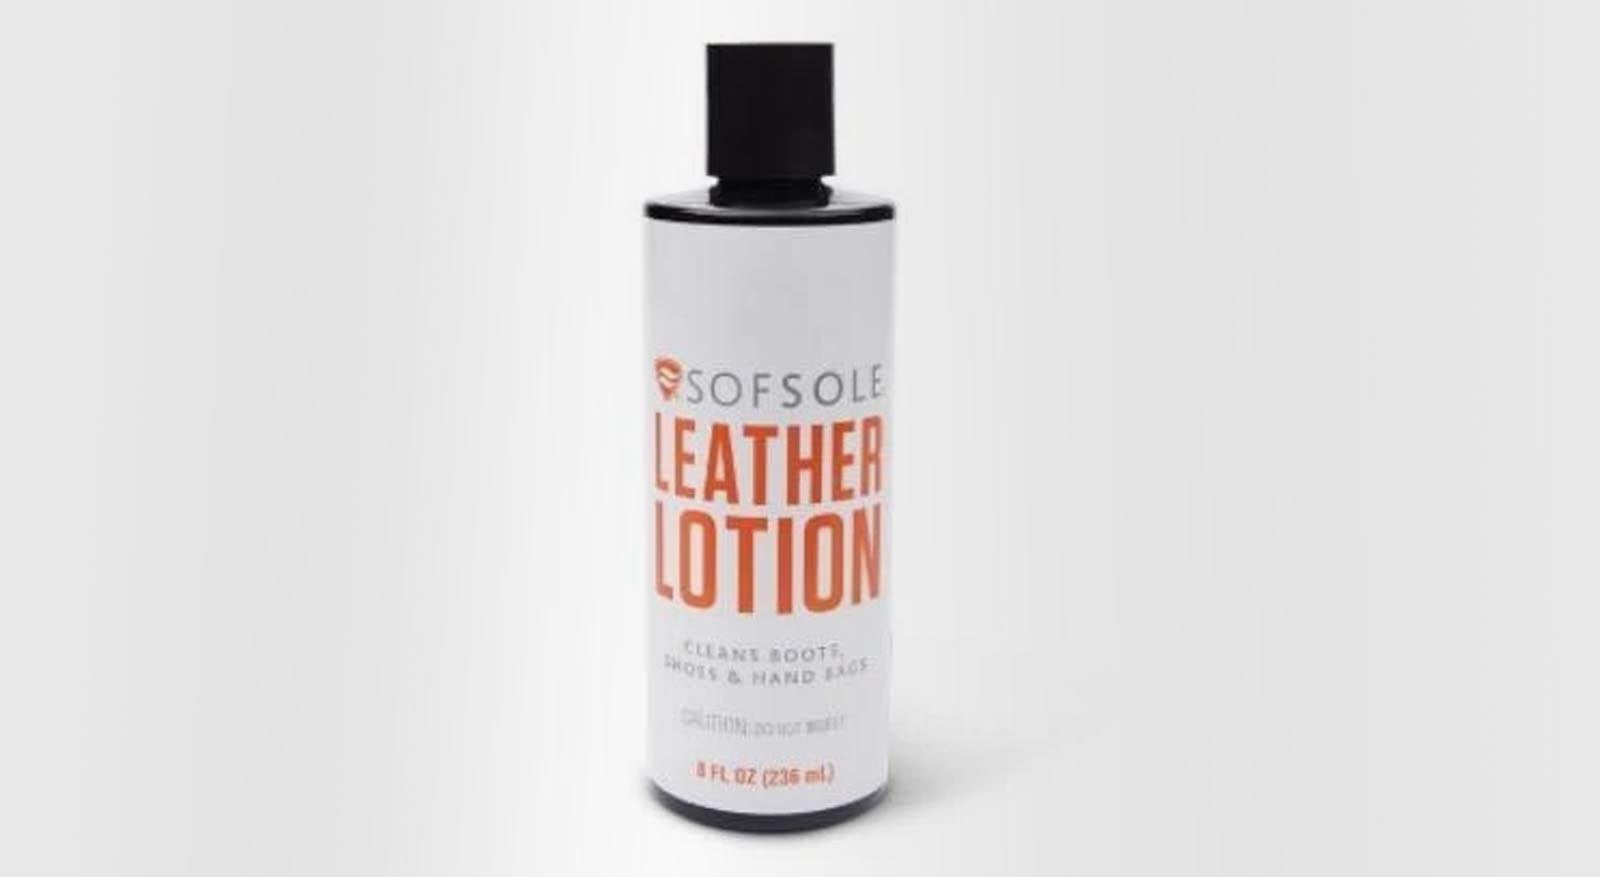 leather lotion